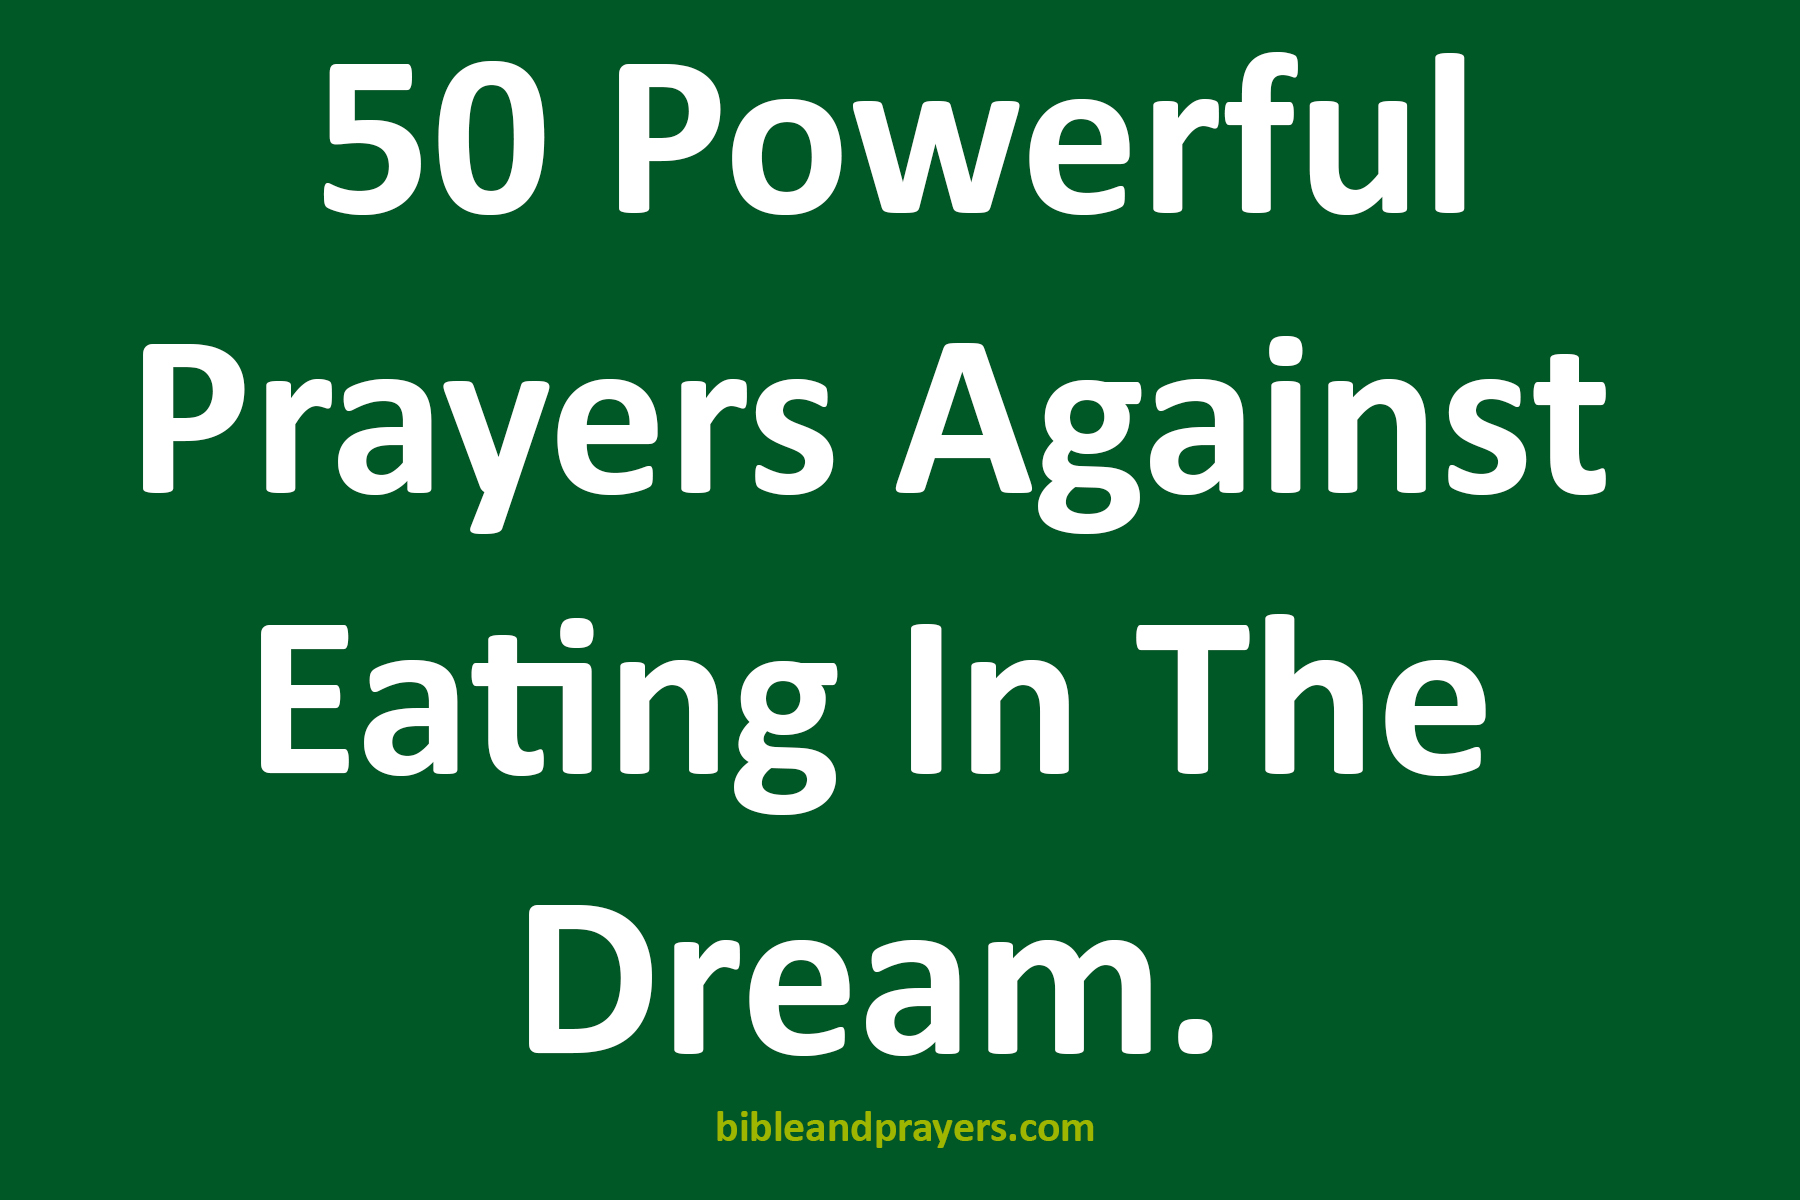 50 Powerful Prayers Against Eating In The Dream